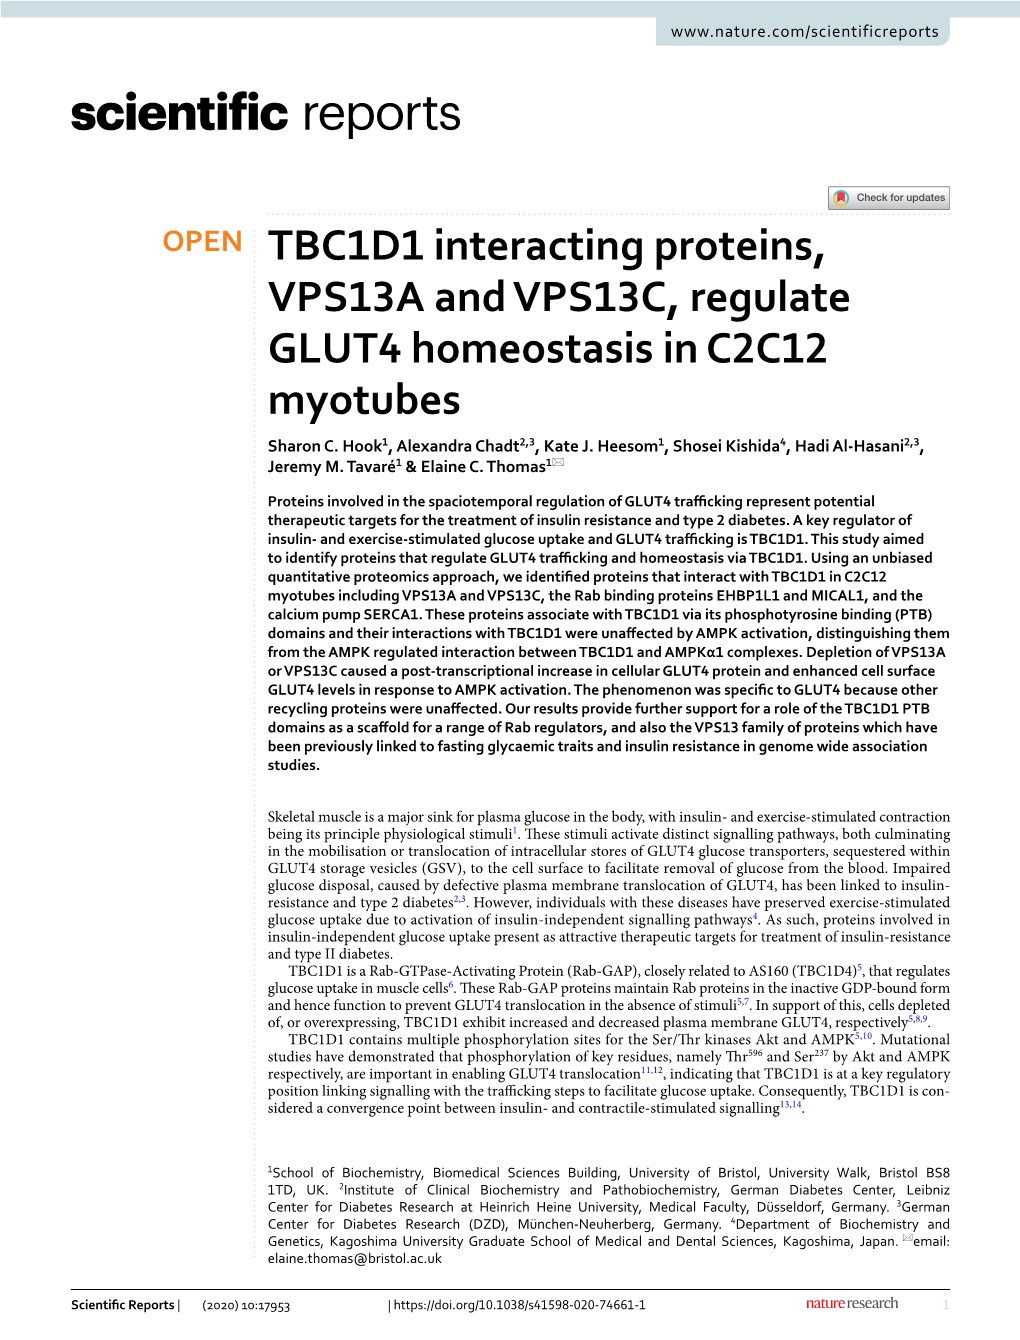 TBC1D1 Interacting Proteins, VPS13A and VPS13C, Regulate GLUT4 Homeostasis in C2C12 Myotubes Sharon C